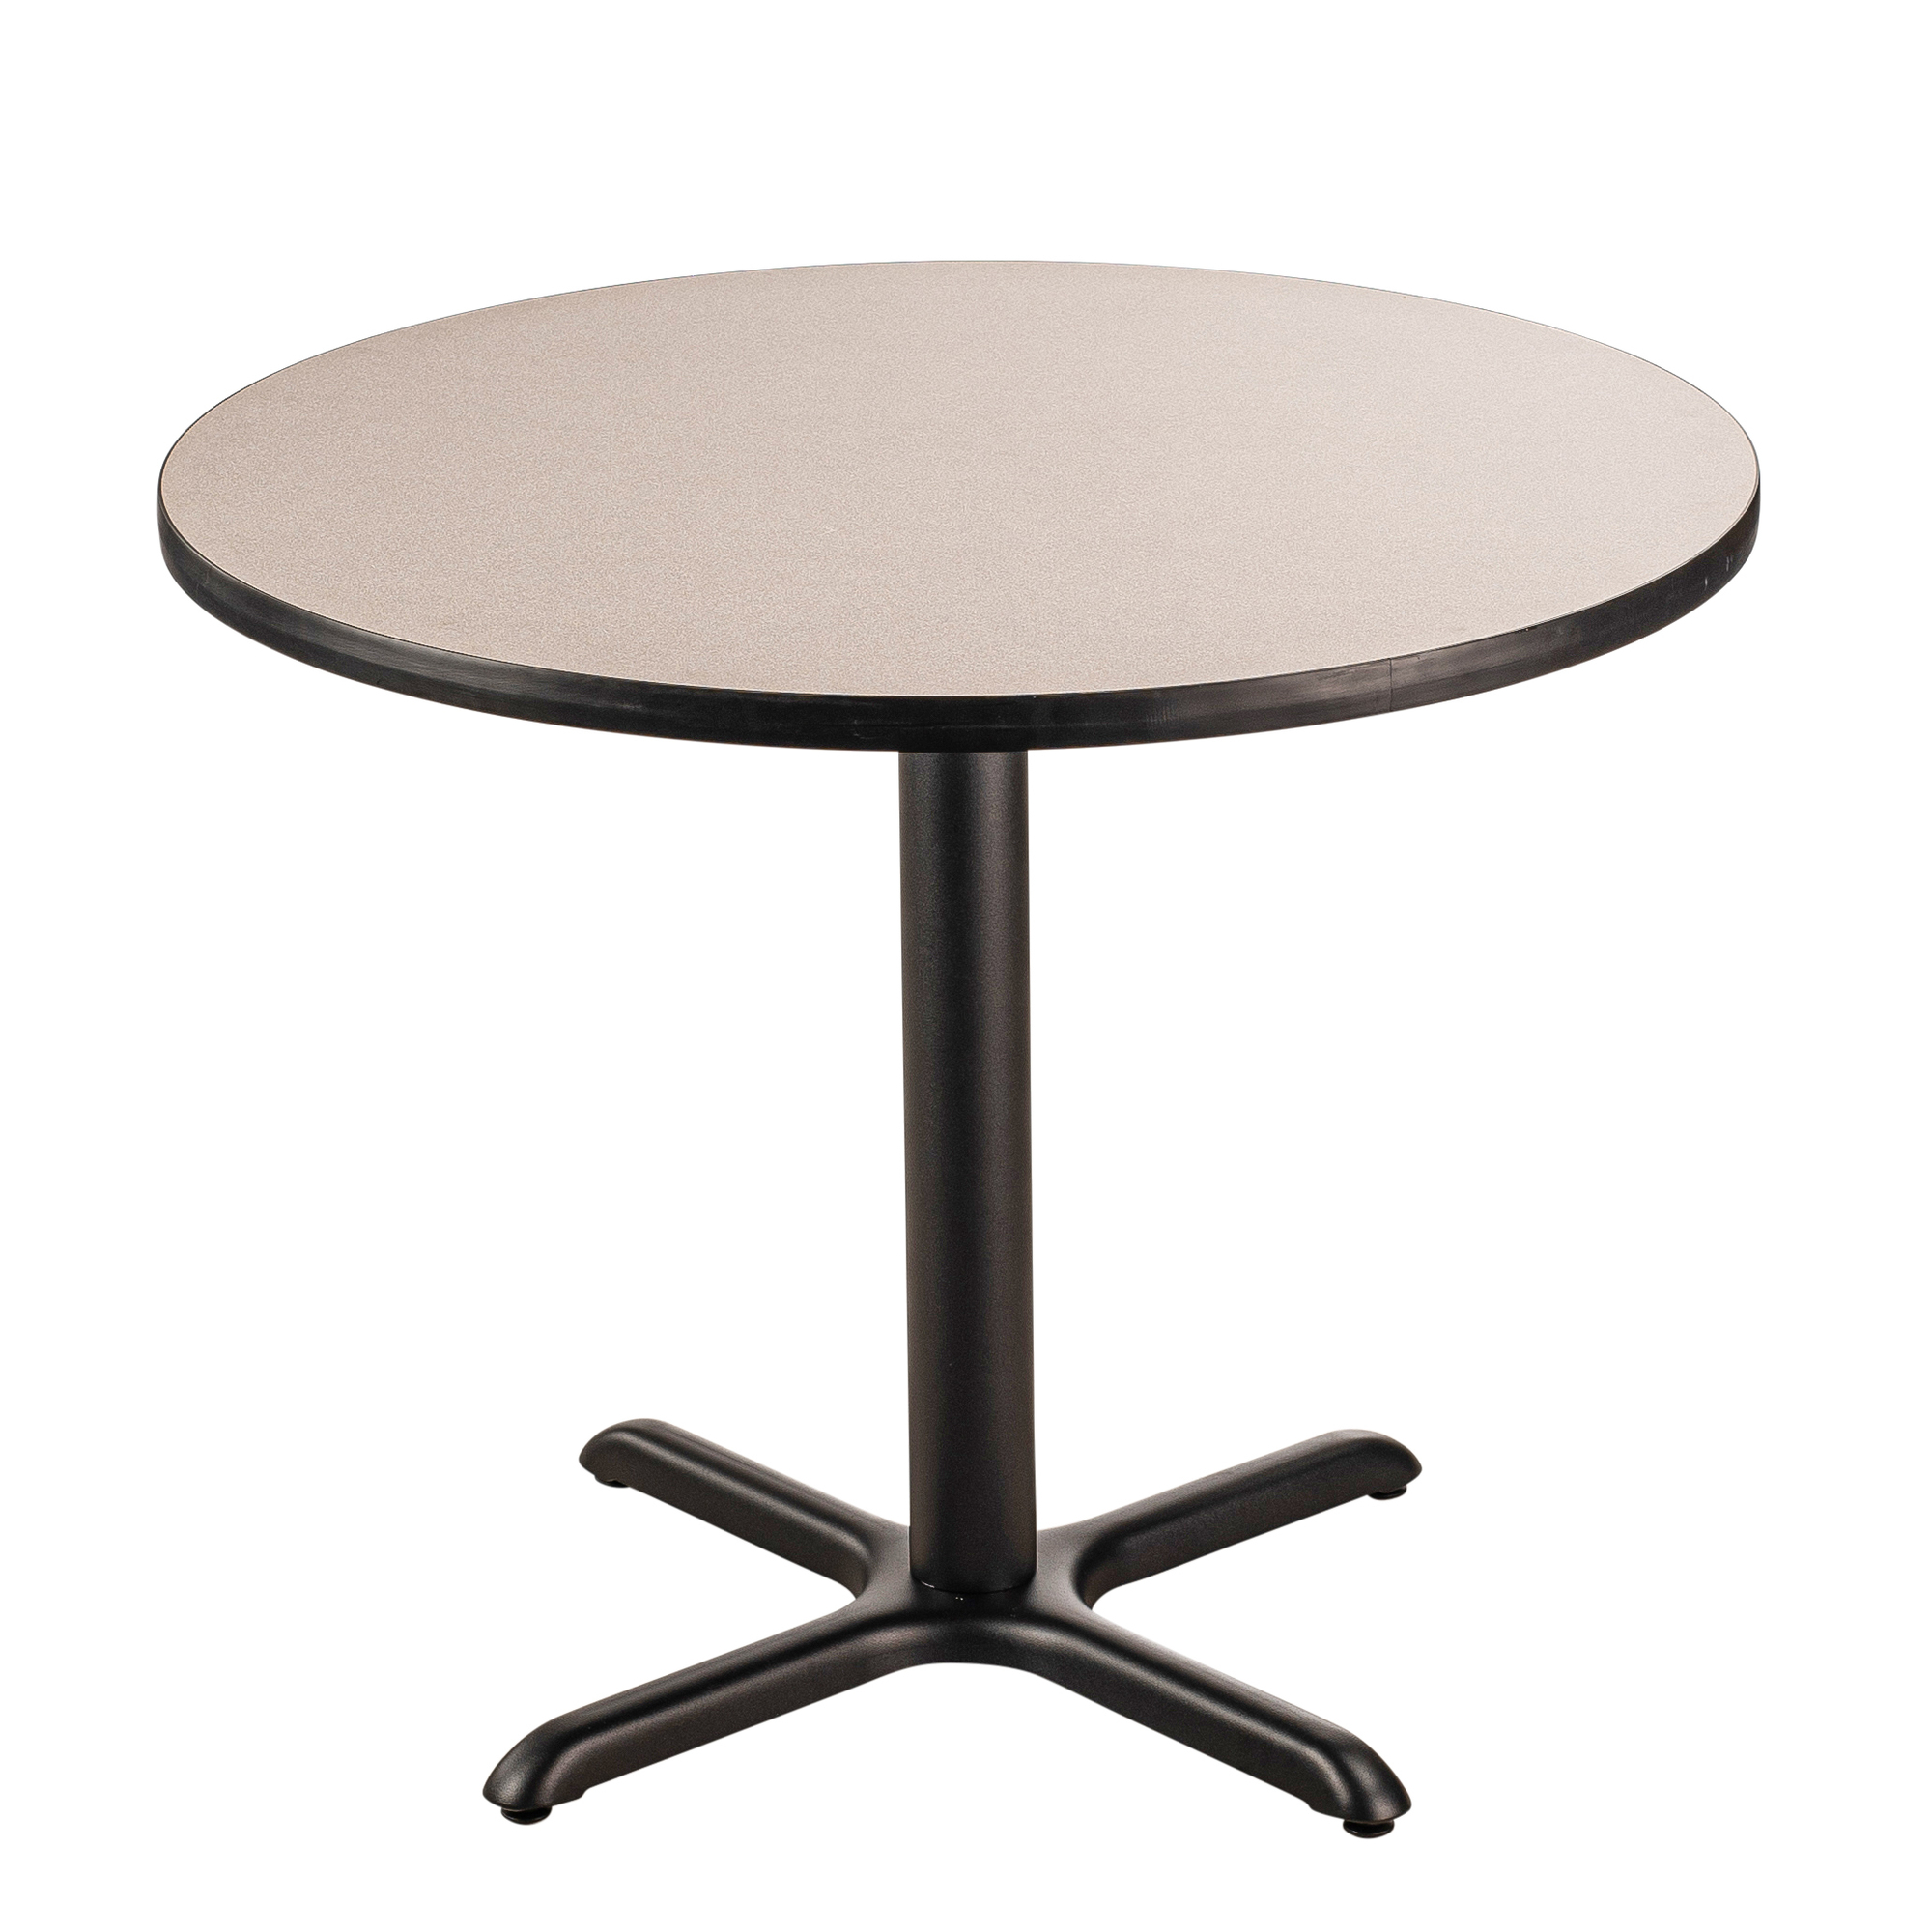 "National Public Seating, Cafe Table, 36x36x30 Round ""X"" Base, Height 30 in, Model CT13636XDPBTMGY"